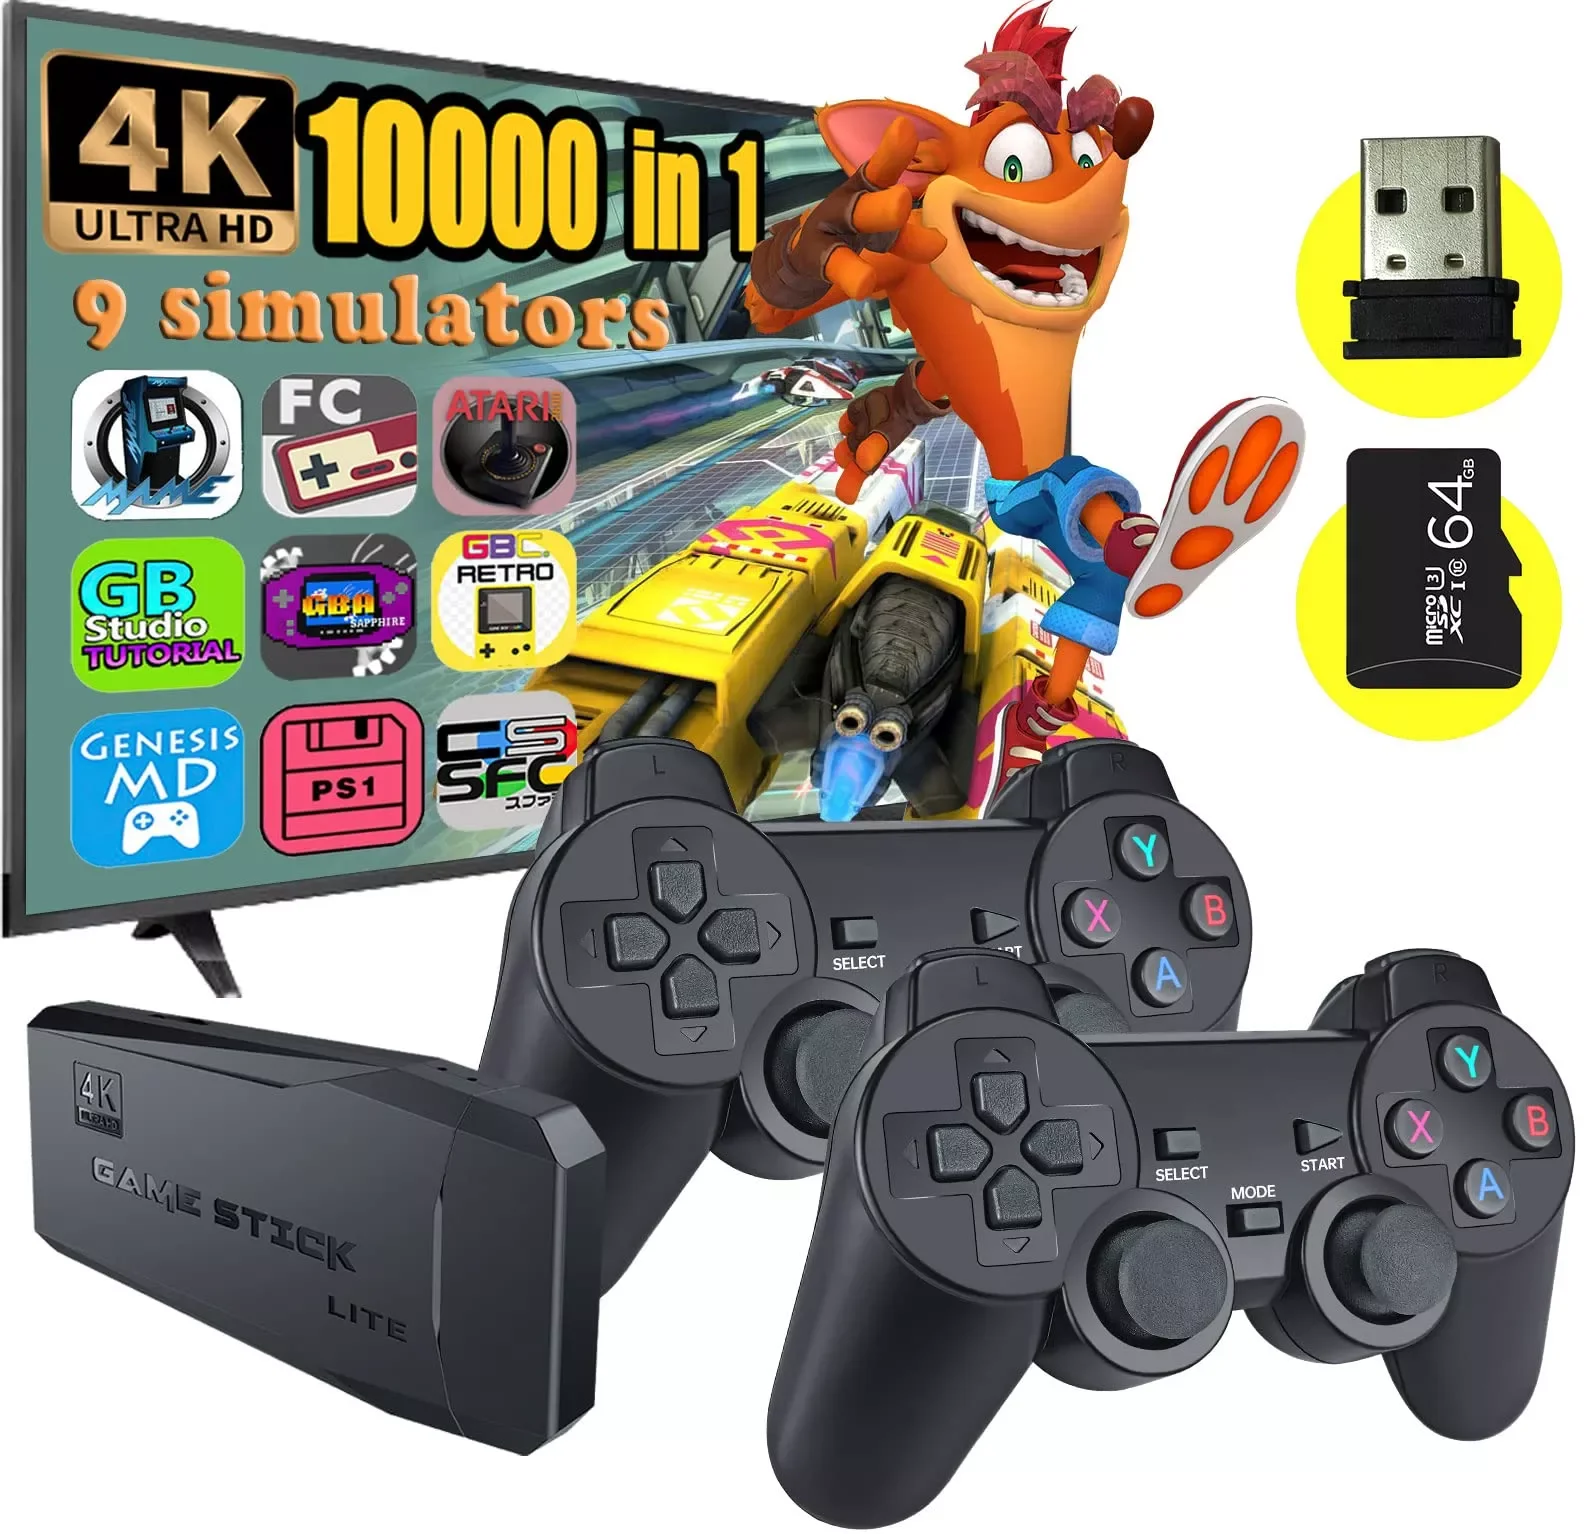 

NEW2023 64G Game Stick Lite 4K Built-In 10000 Game Retro Game Console For PS1 GBA Wireless Controller for Gba KID Xmas Gift Drop